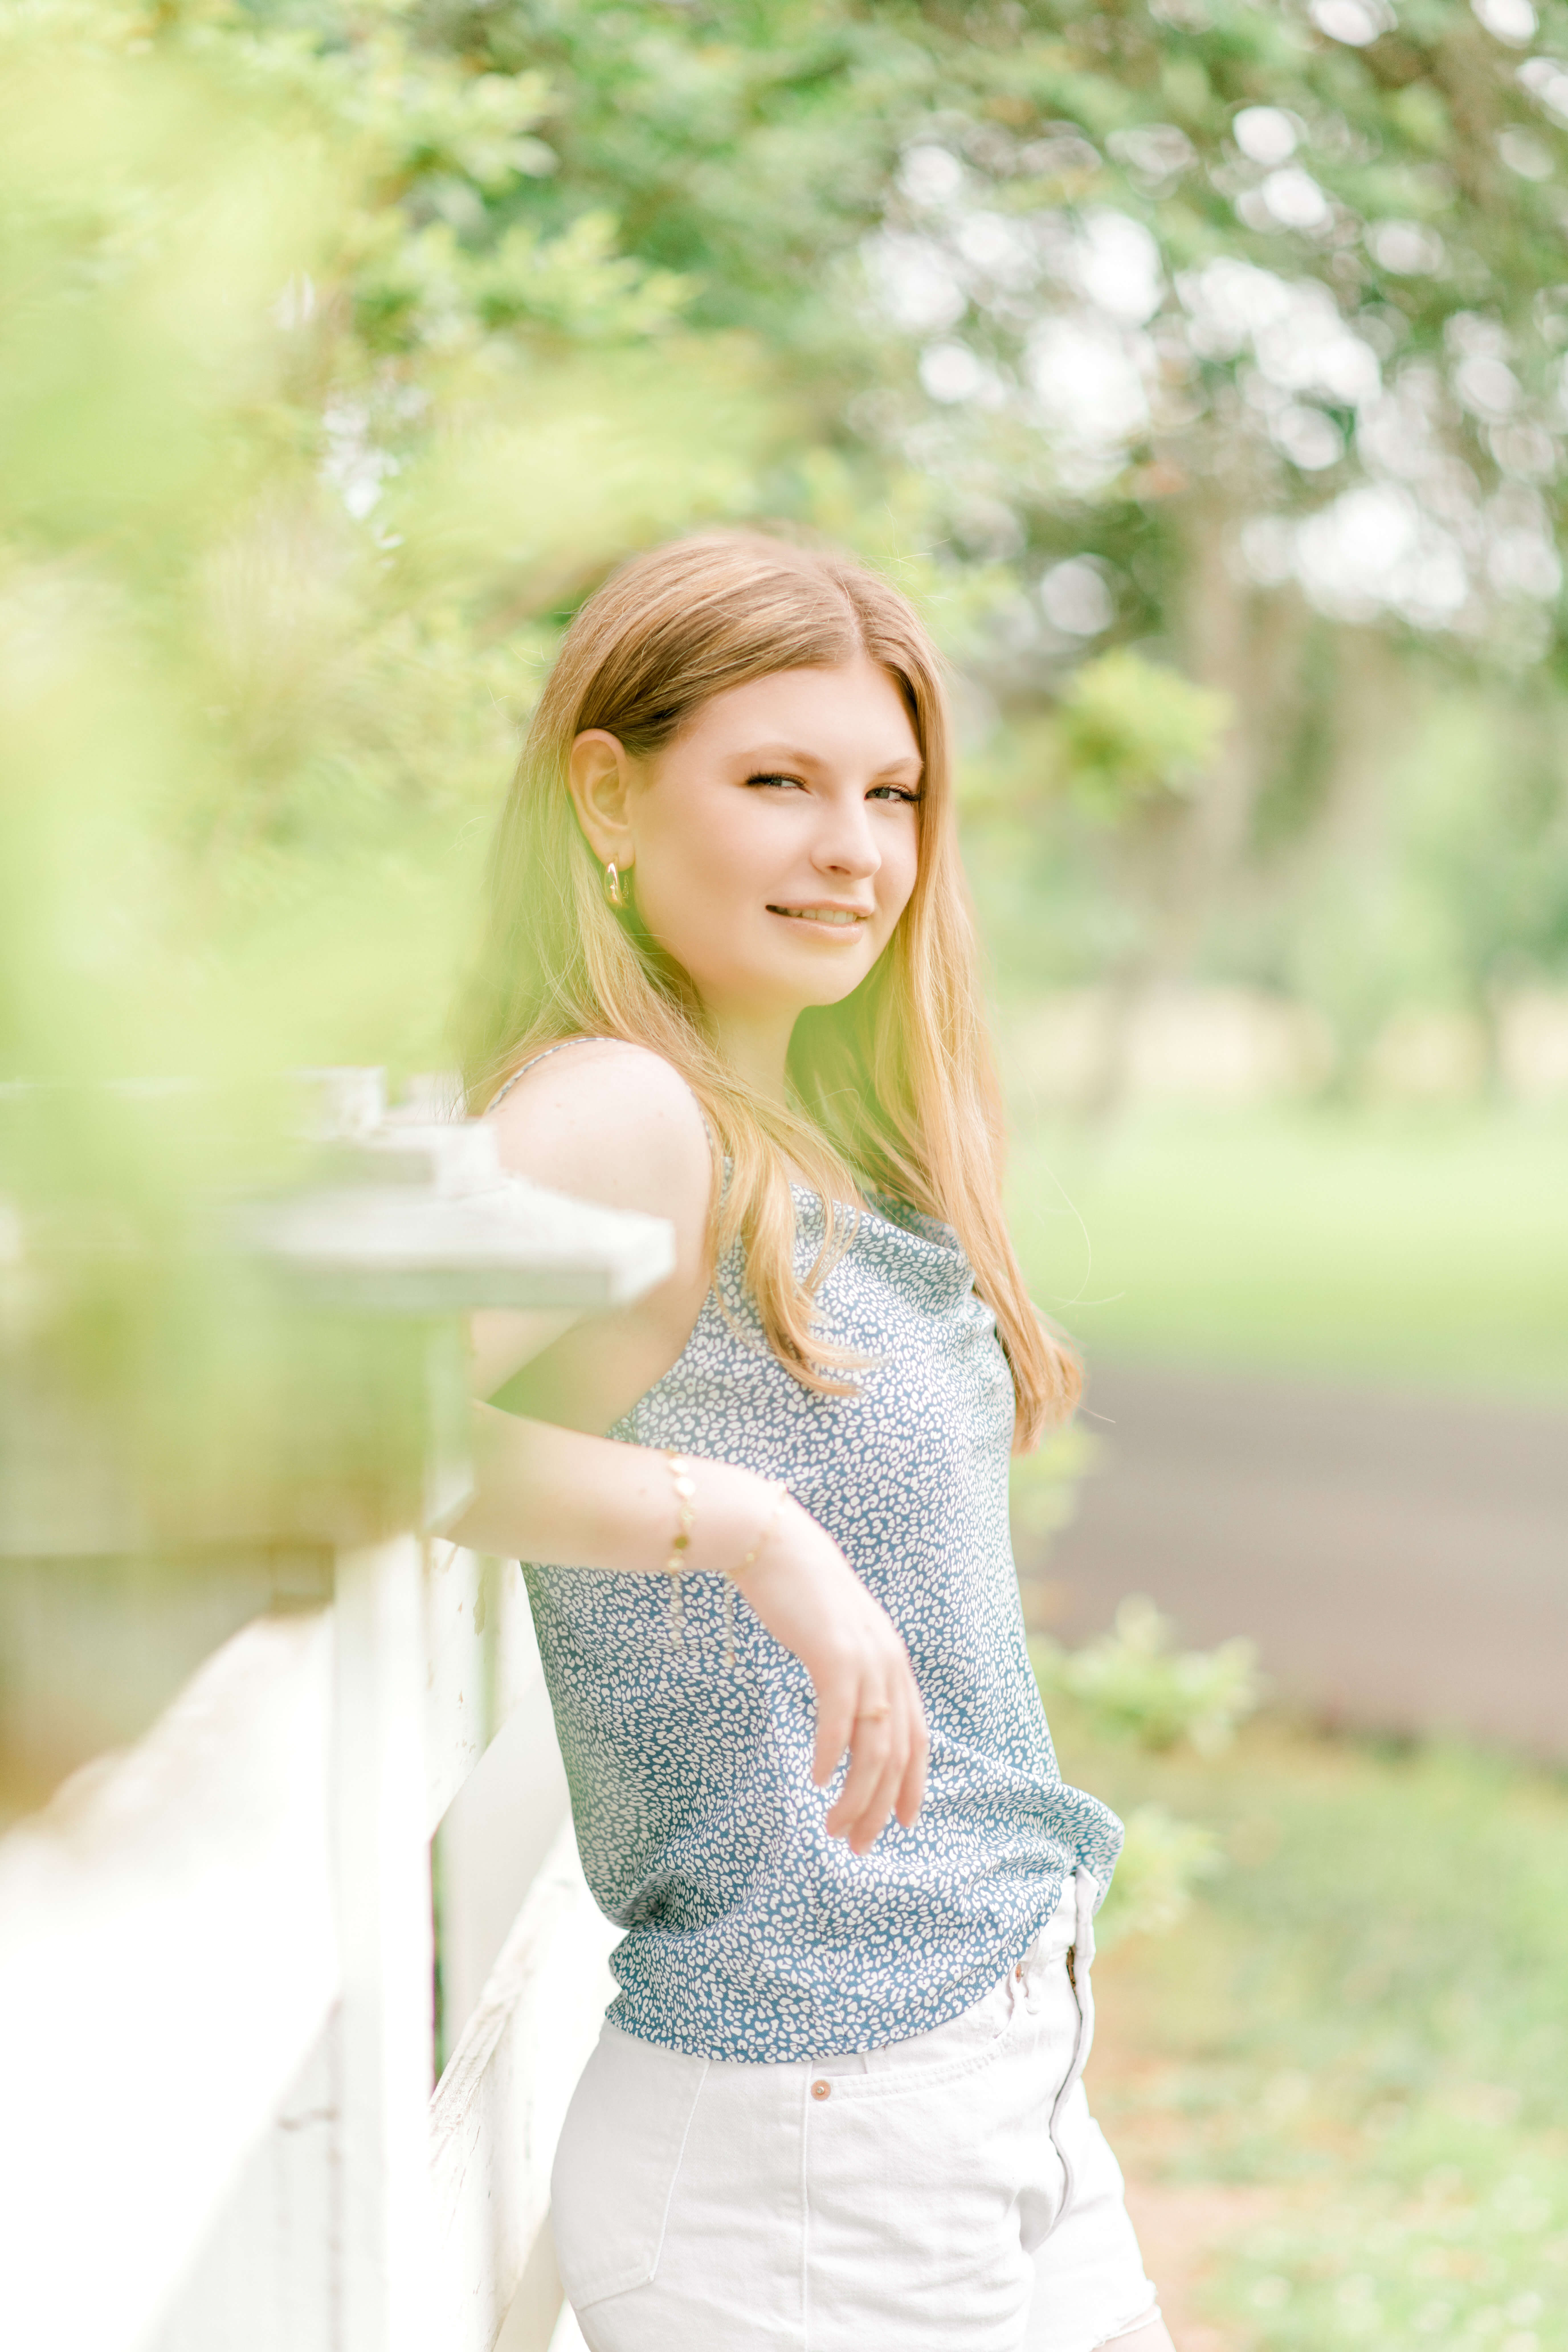 Standing along a white picket fence, a strawberry blonde senior in a silky blue top looks towards her right shoulder and smiles.